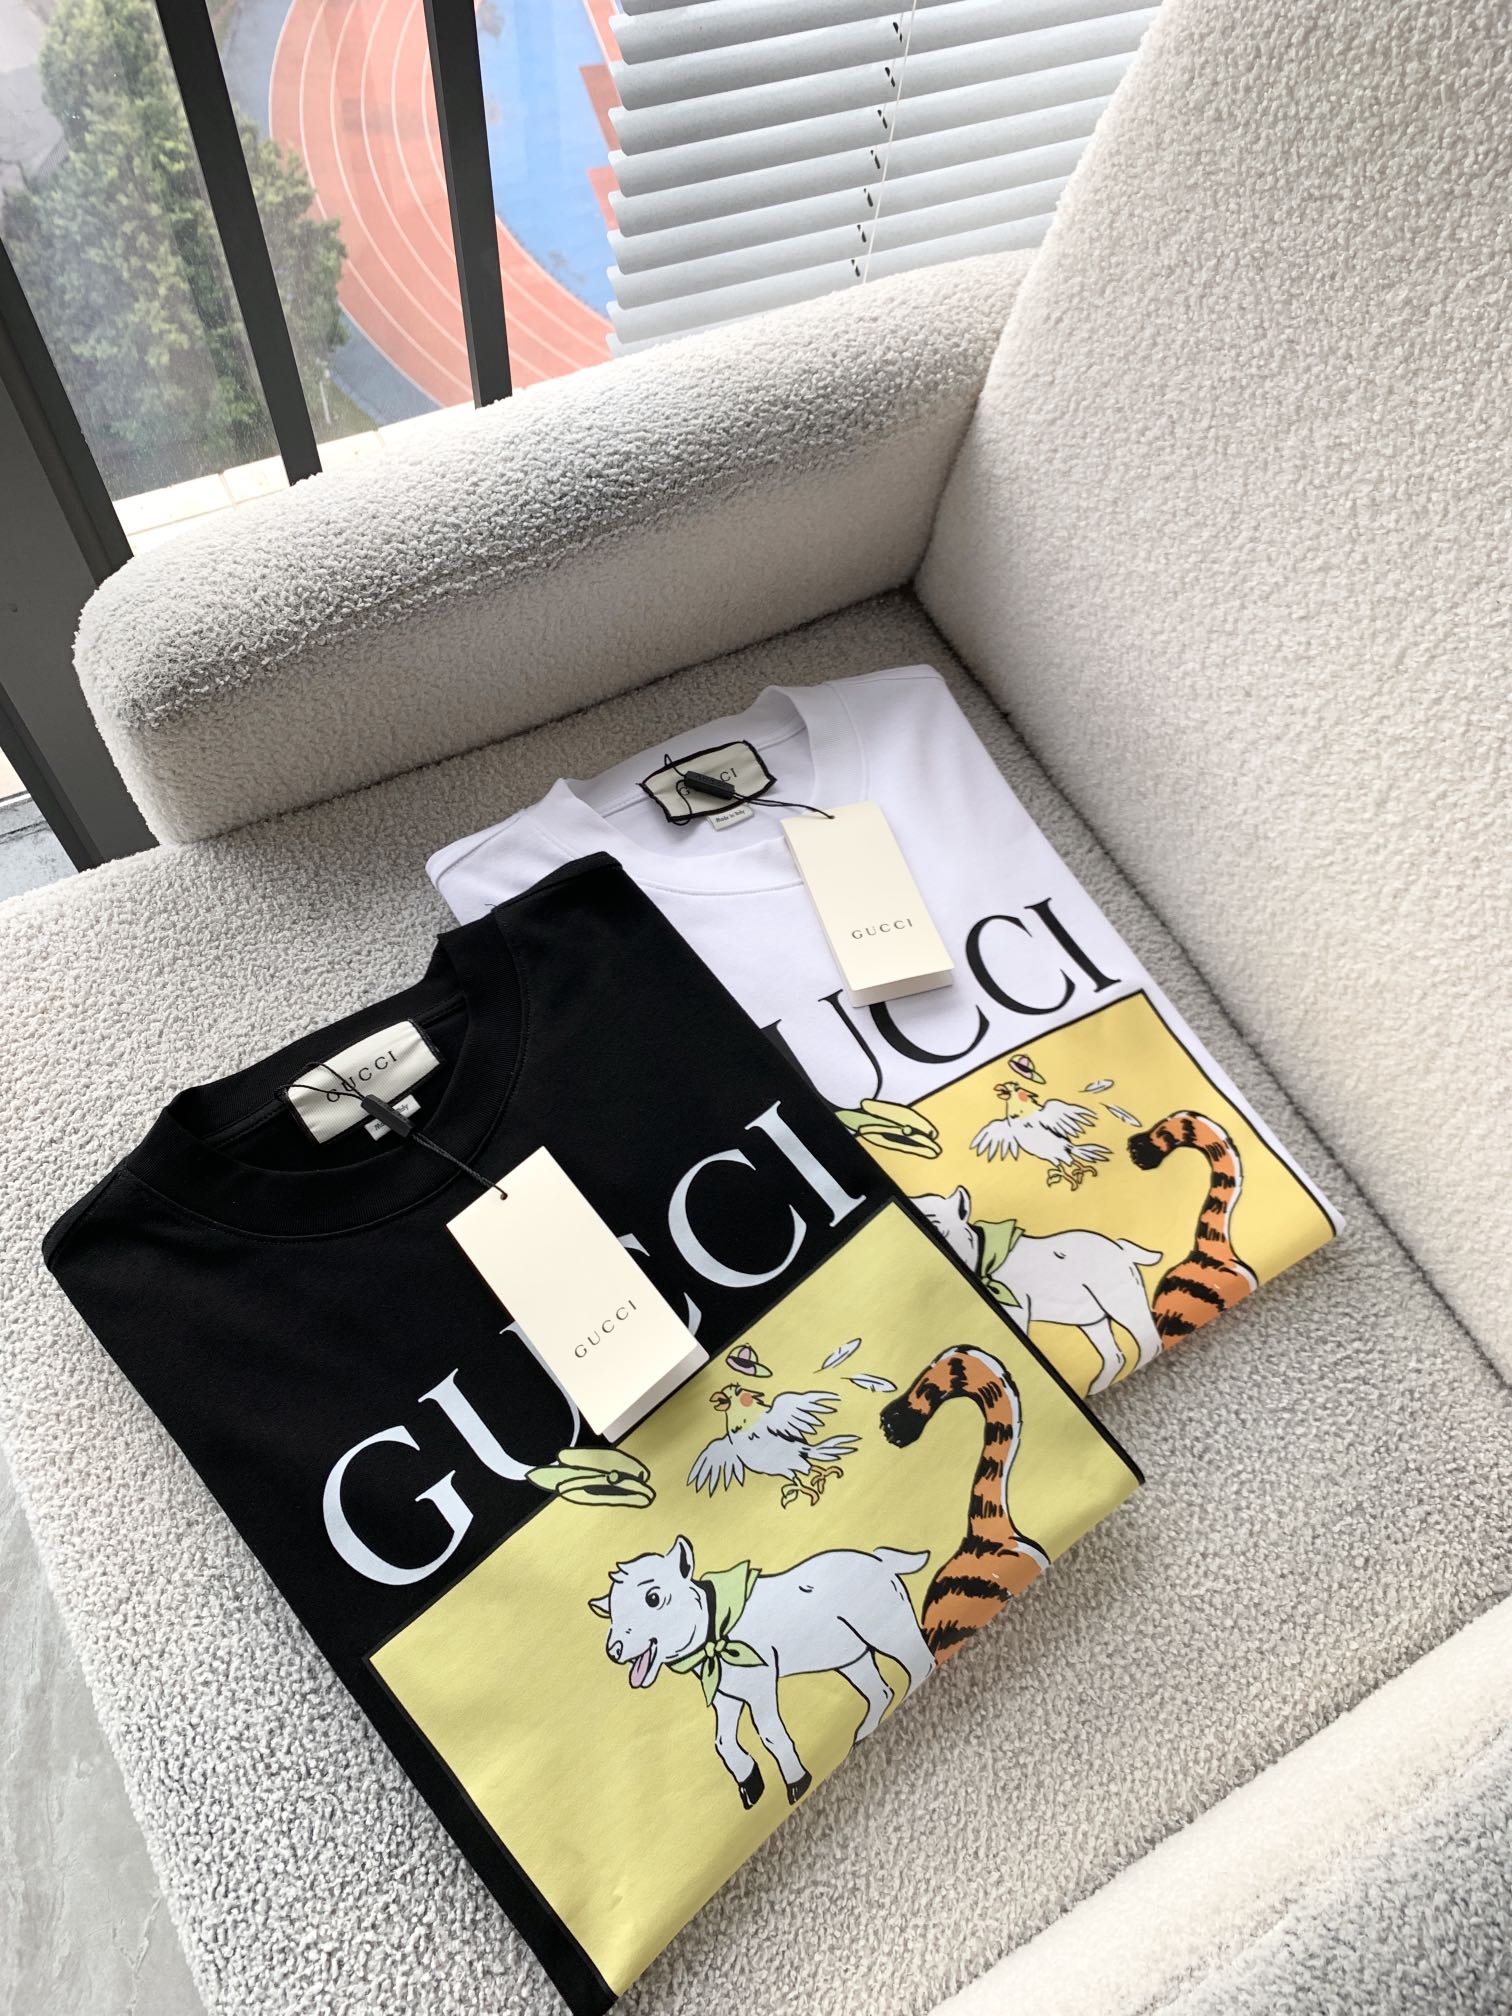 Gucci Clothing T-Shirt Find replica
 Unisex Cotton Spring/Summer Collection Short Sleeve